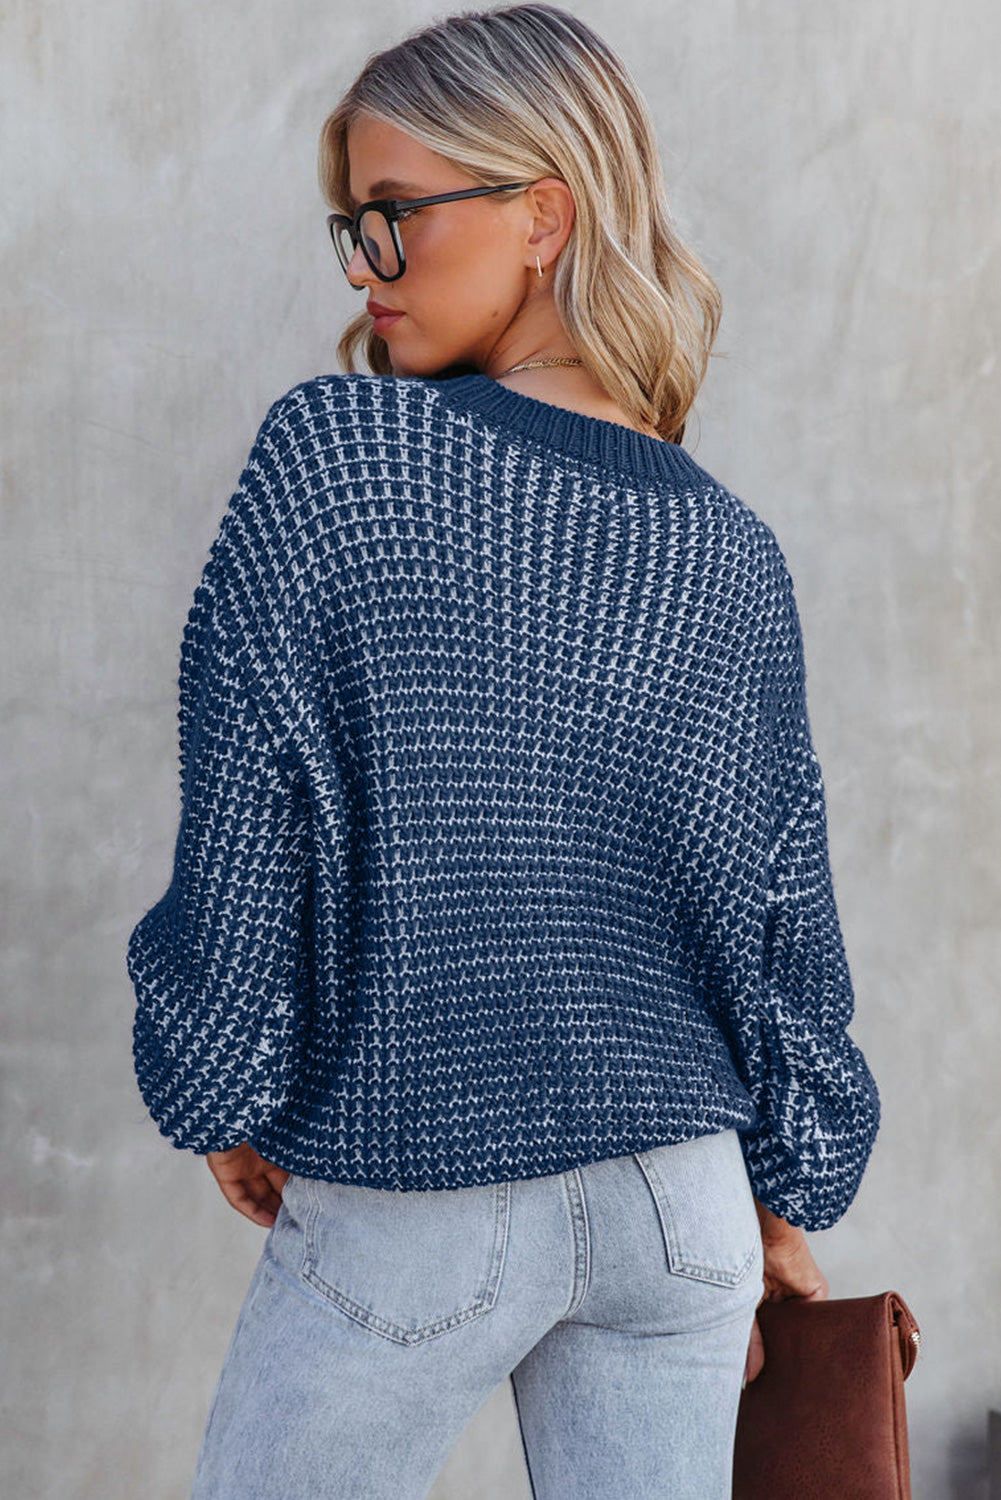 LC2722915-5-S, LC2722915-5-M, LC2722915-5-L, LC2722915-5-XL, LC2722915-5-2XL, Blue Heathered Knit Drop Shoulder Puff Sleeve Sweater